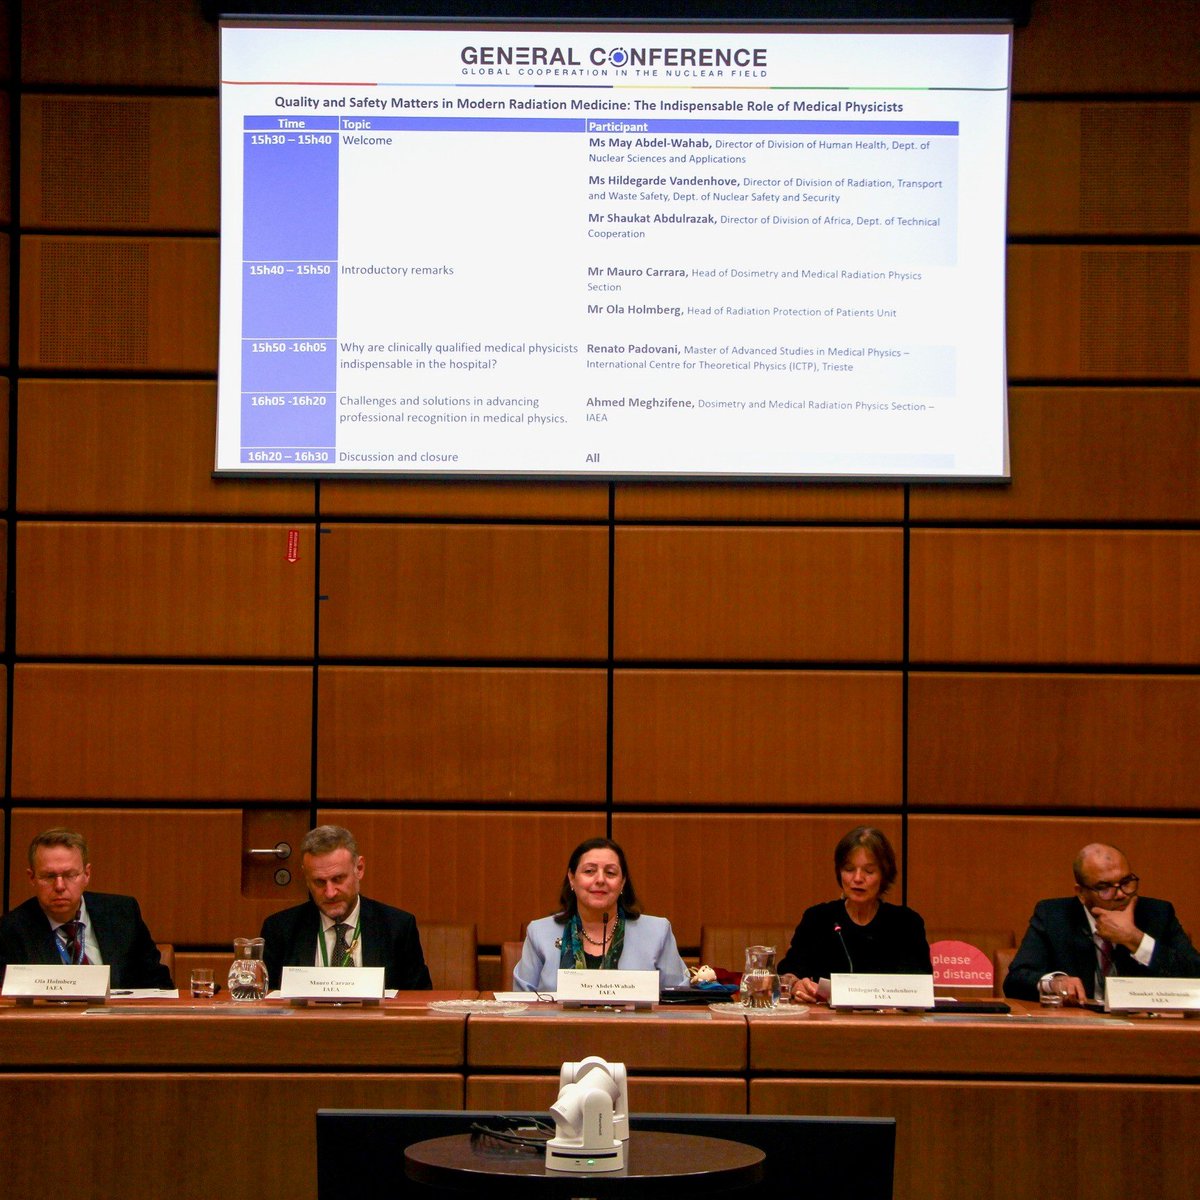 Without #MedicalPhysics, there simply is no high-quality cancer care. #IAEAGC side event highlighted the indispensable role of medical physicists who ensure accurate radiation for diagnosis & treatment and guarantee quality & safety in modern radiation medicine.